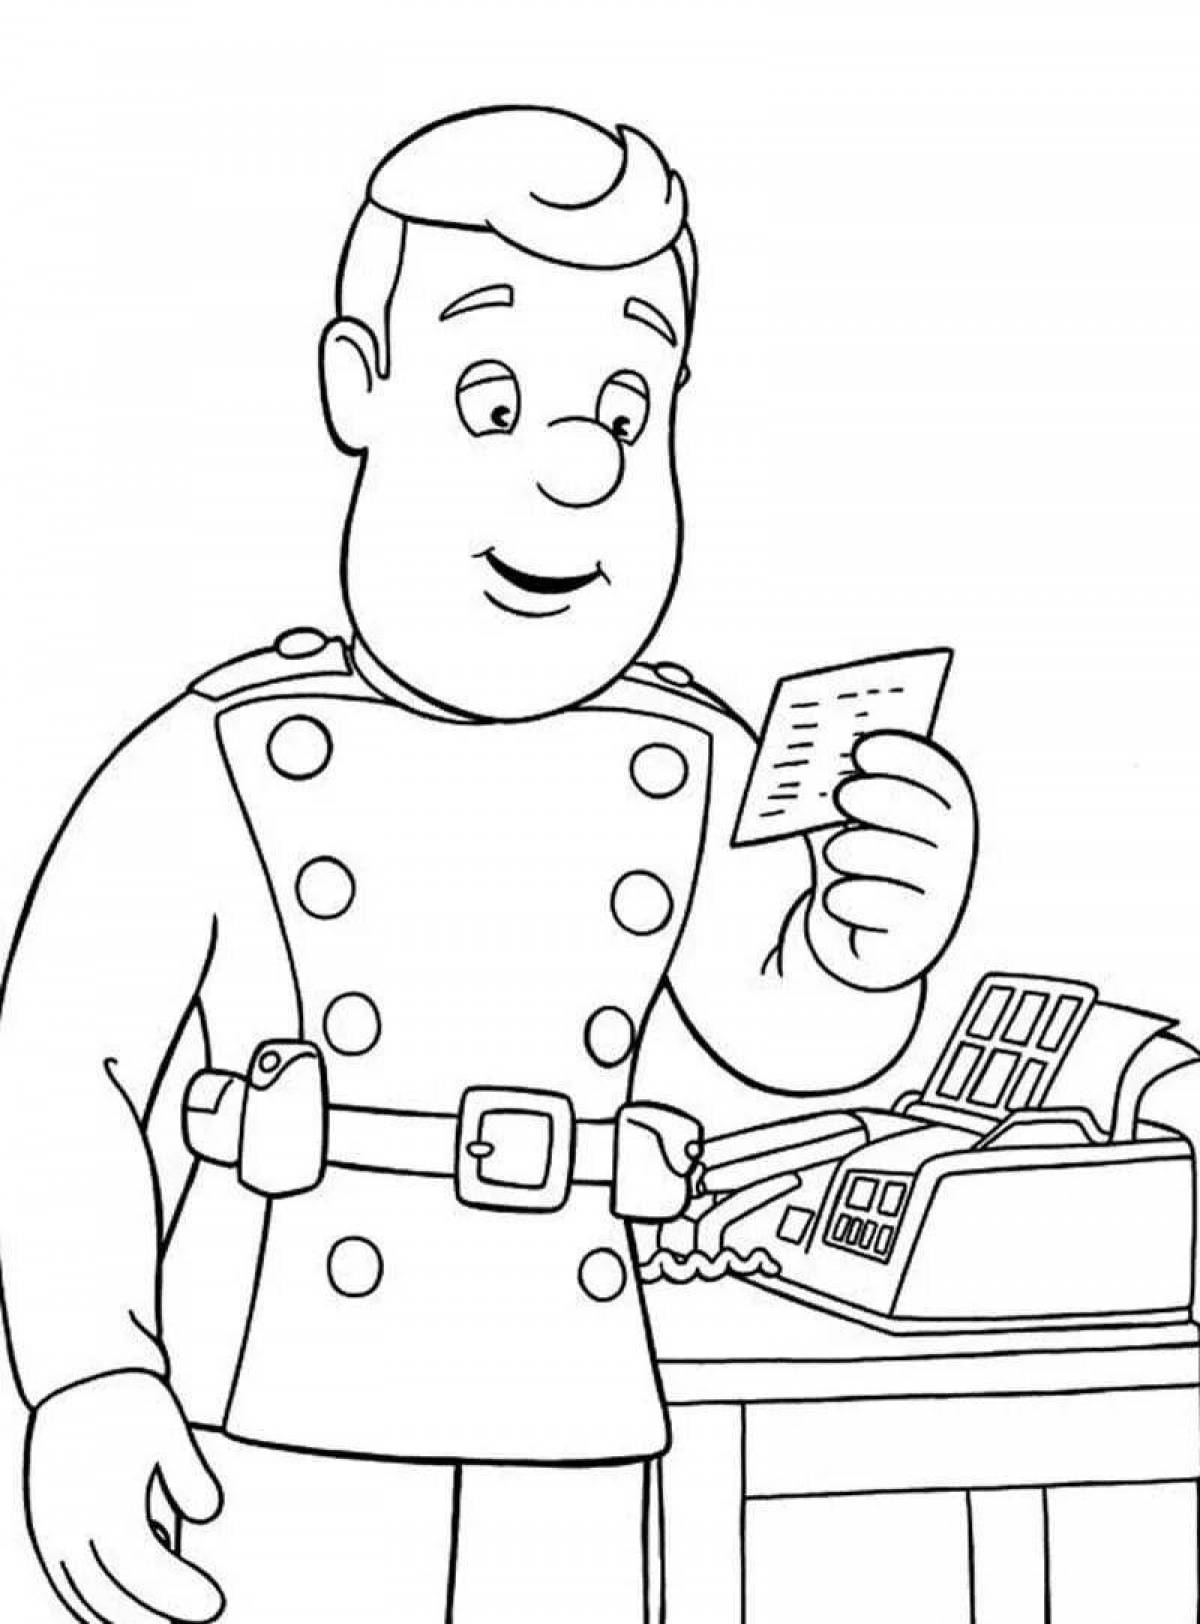 Gorgeous fireman sam coloring book for kids